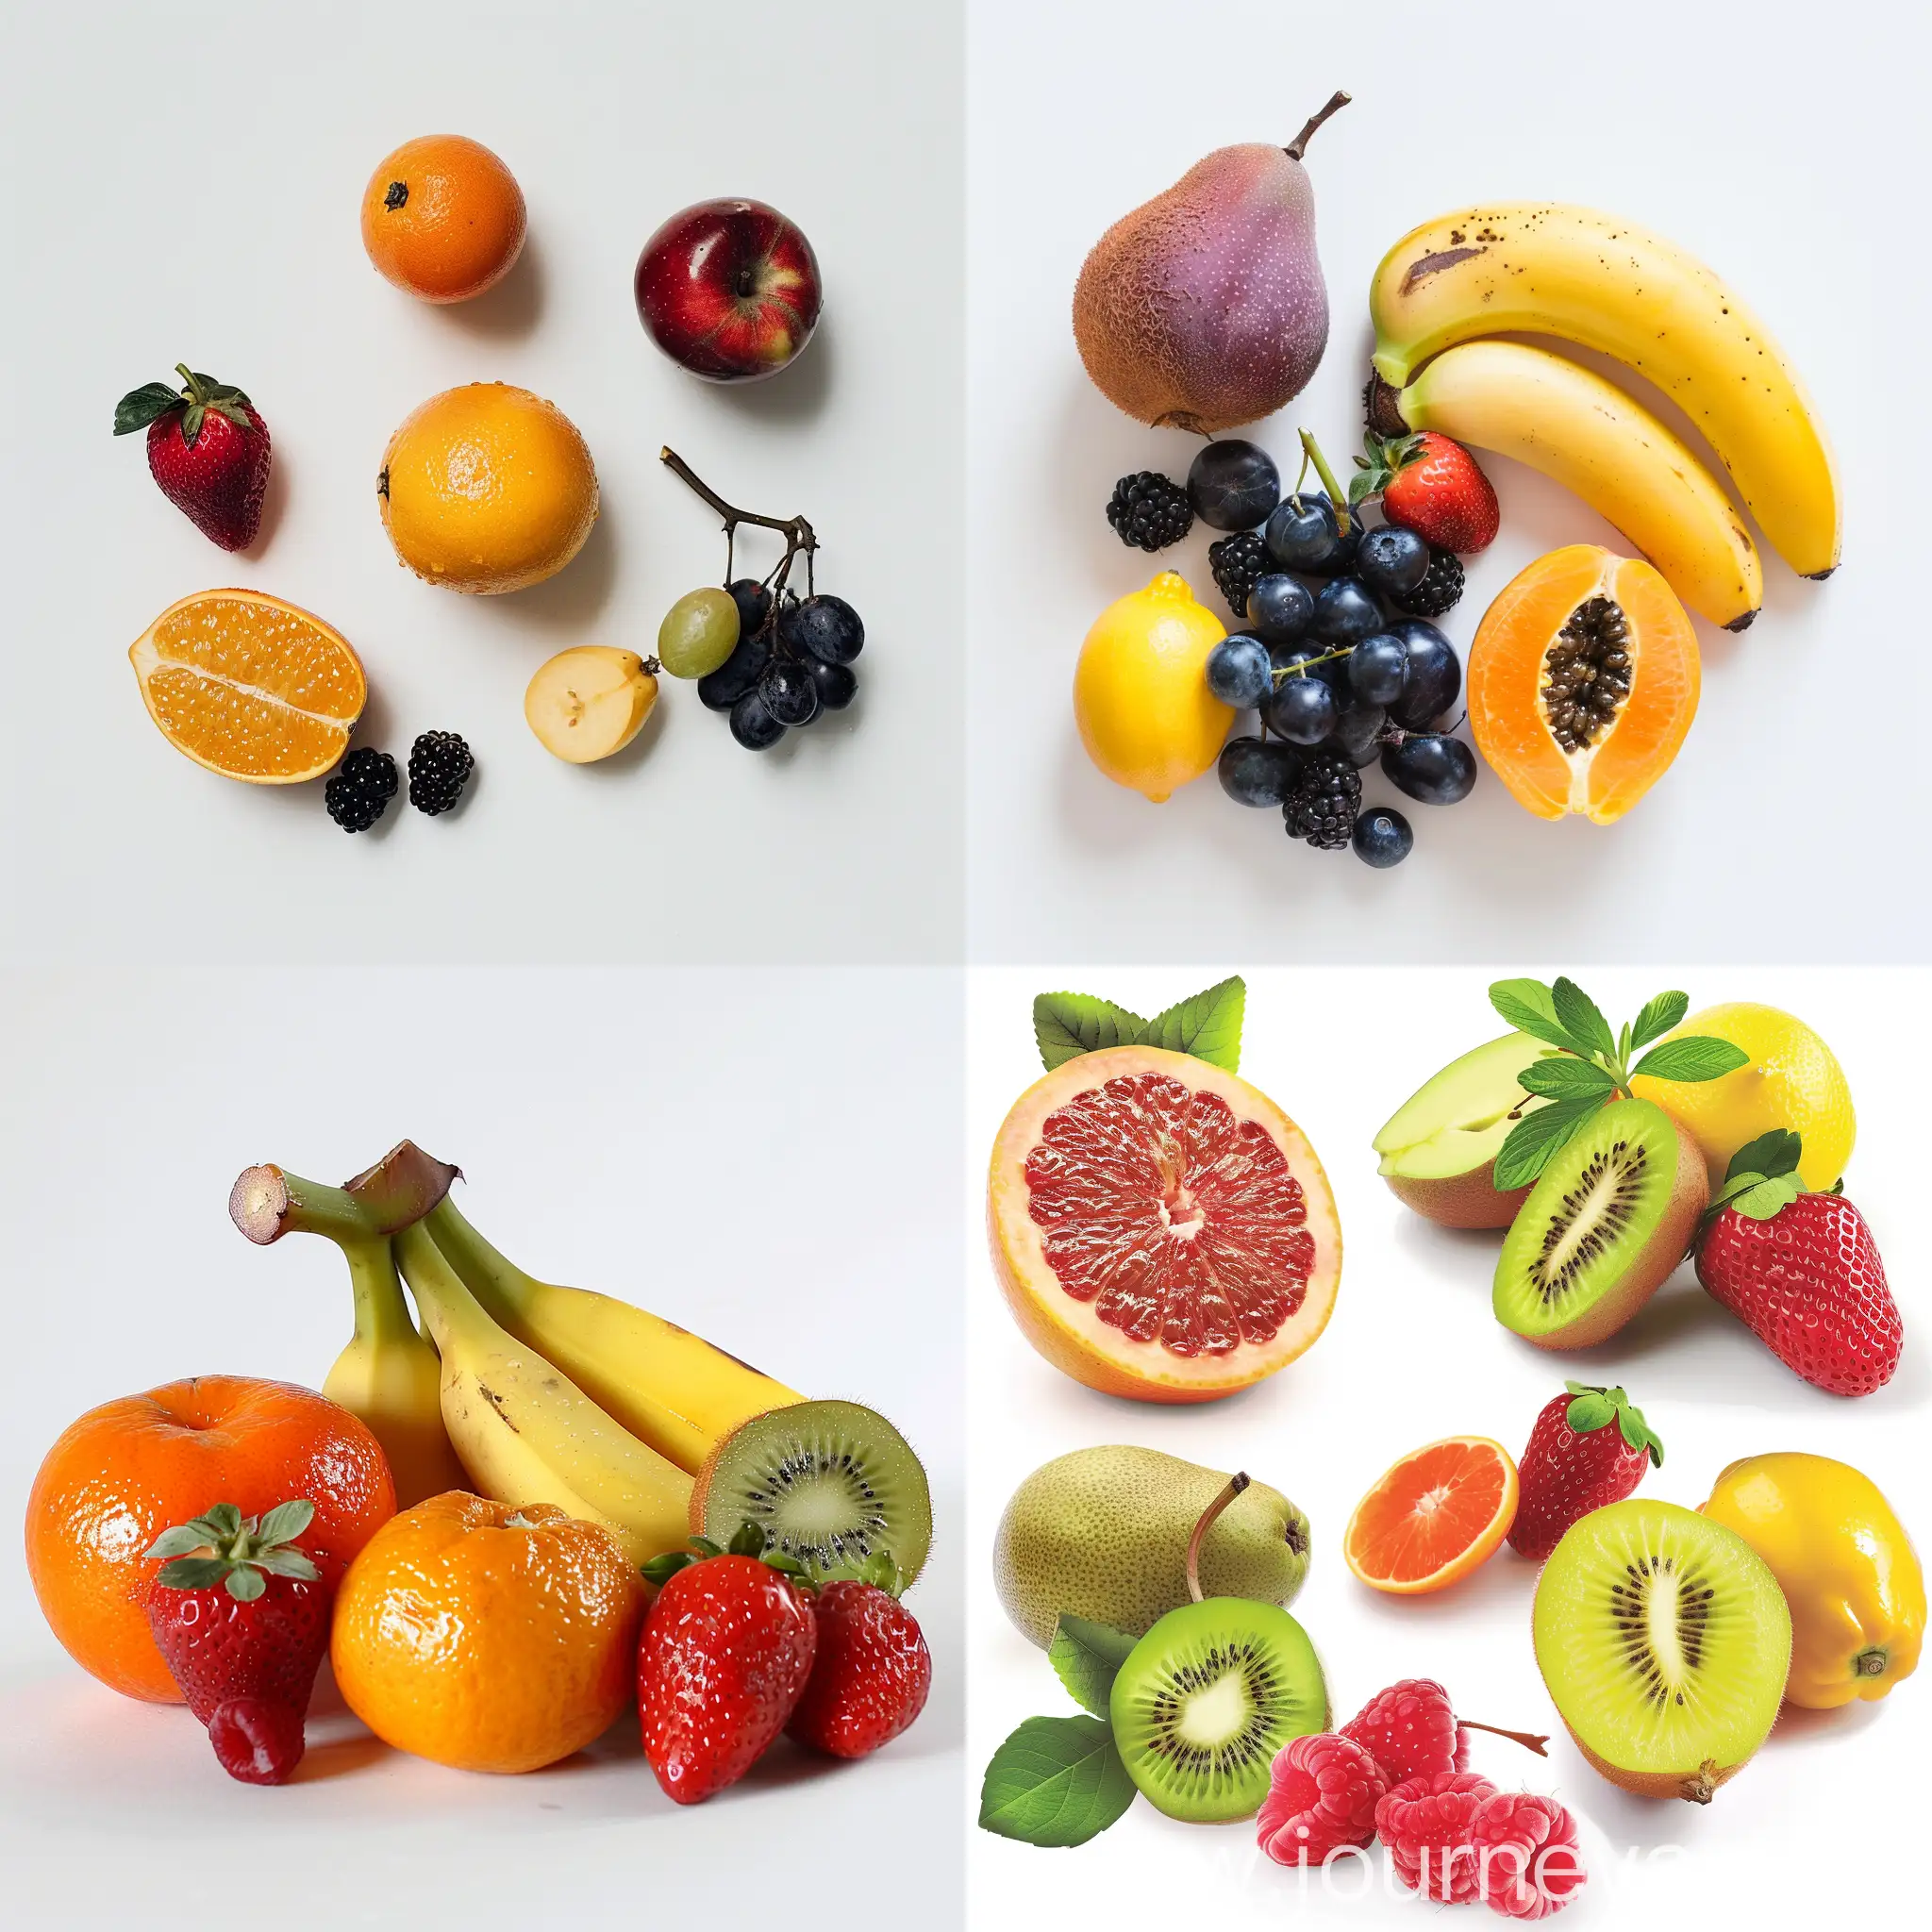 Colorful-Assortment-of-Fruits-on-a-Clean-White-Background